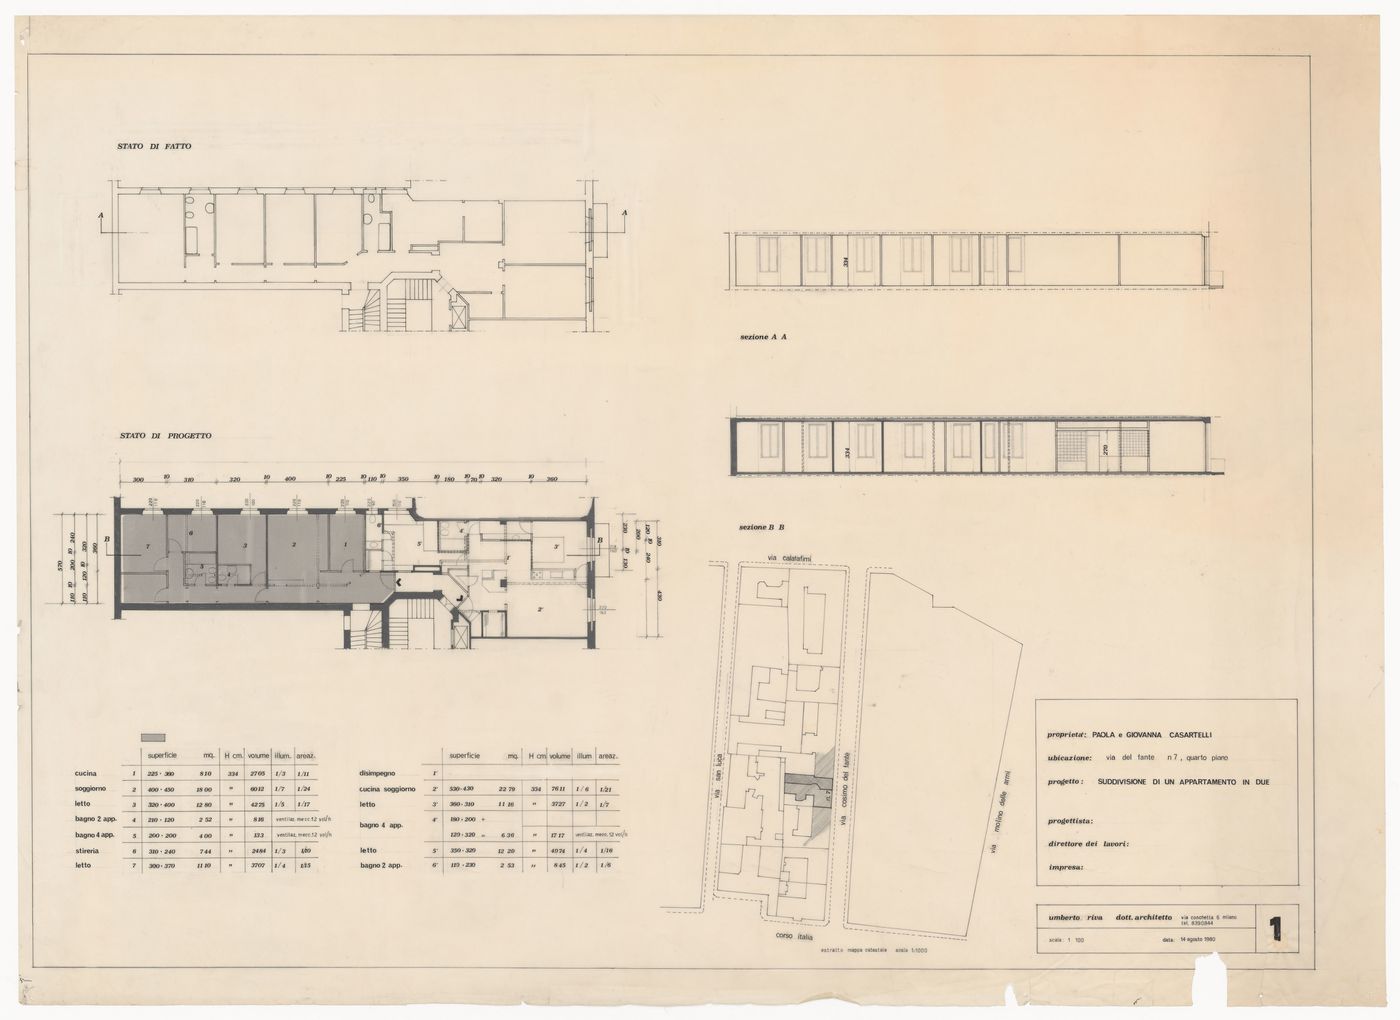 Floor plans and sections for Casa Spataro, Milan, Italy